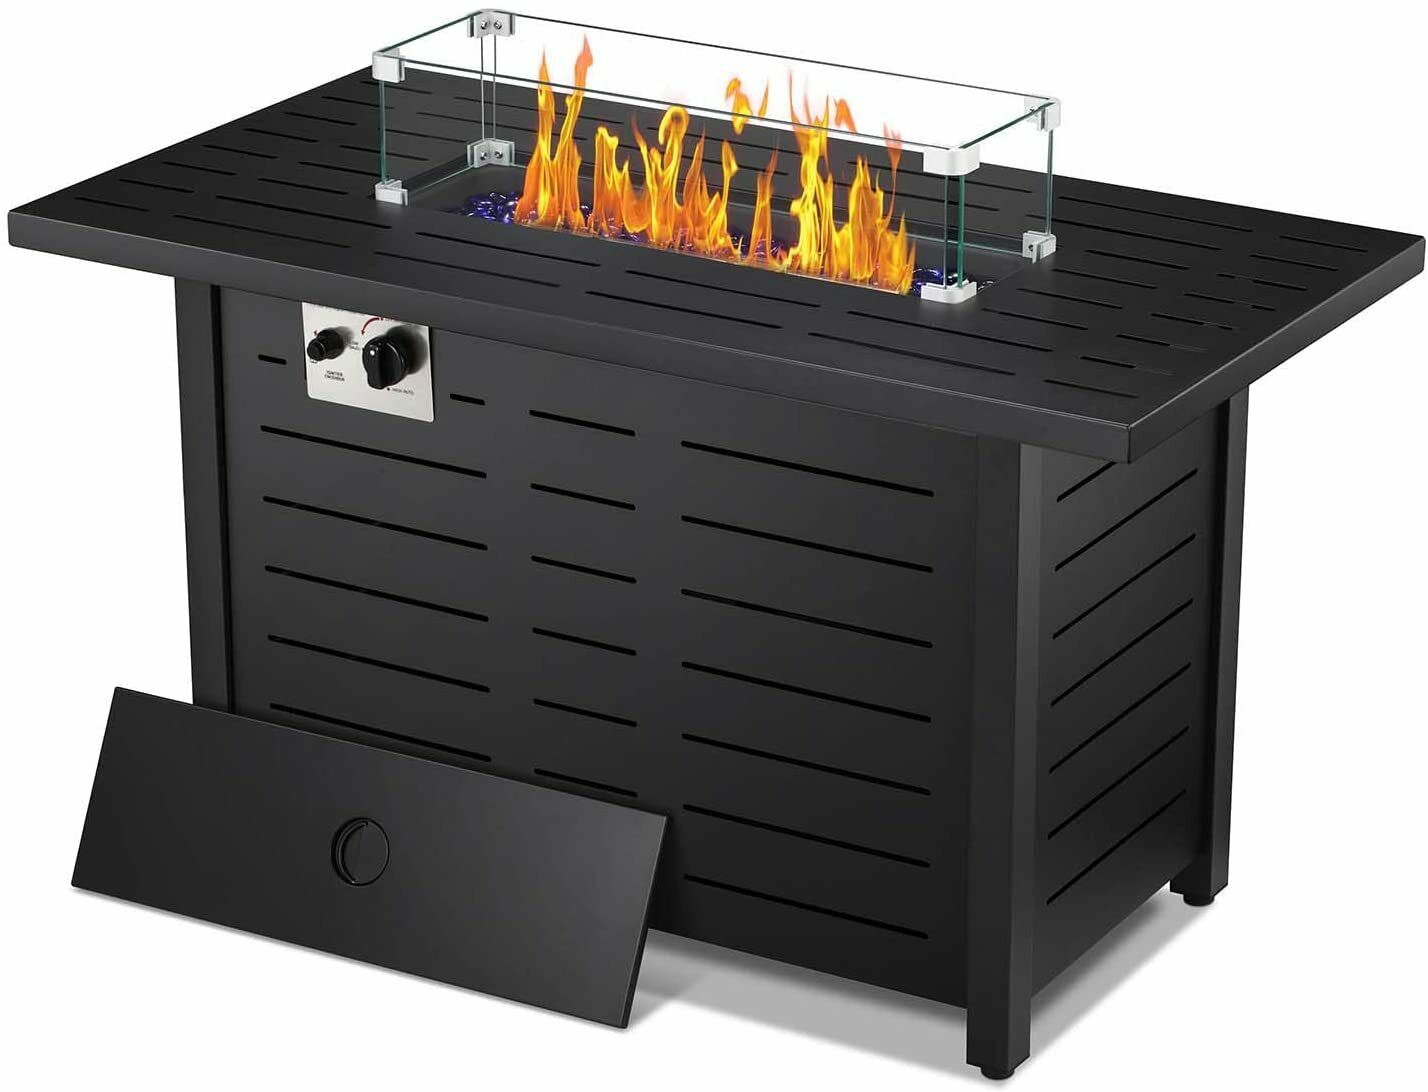 43" 50,000 BTU Outdoor Propane Gas Fire Pit Table with Glass Tabletop for Patio